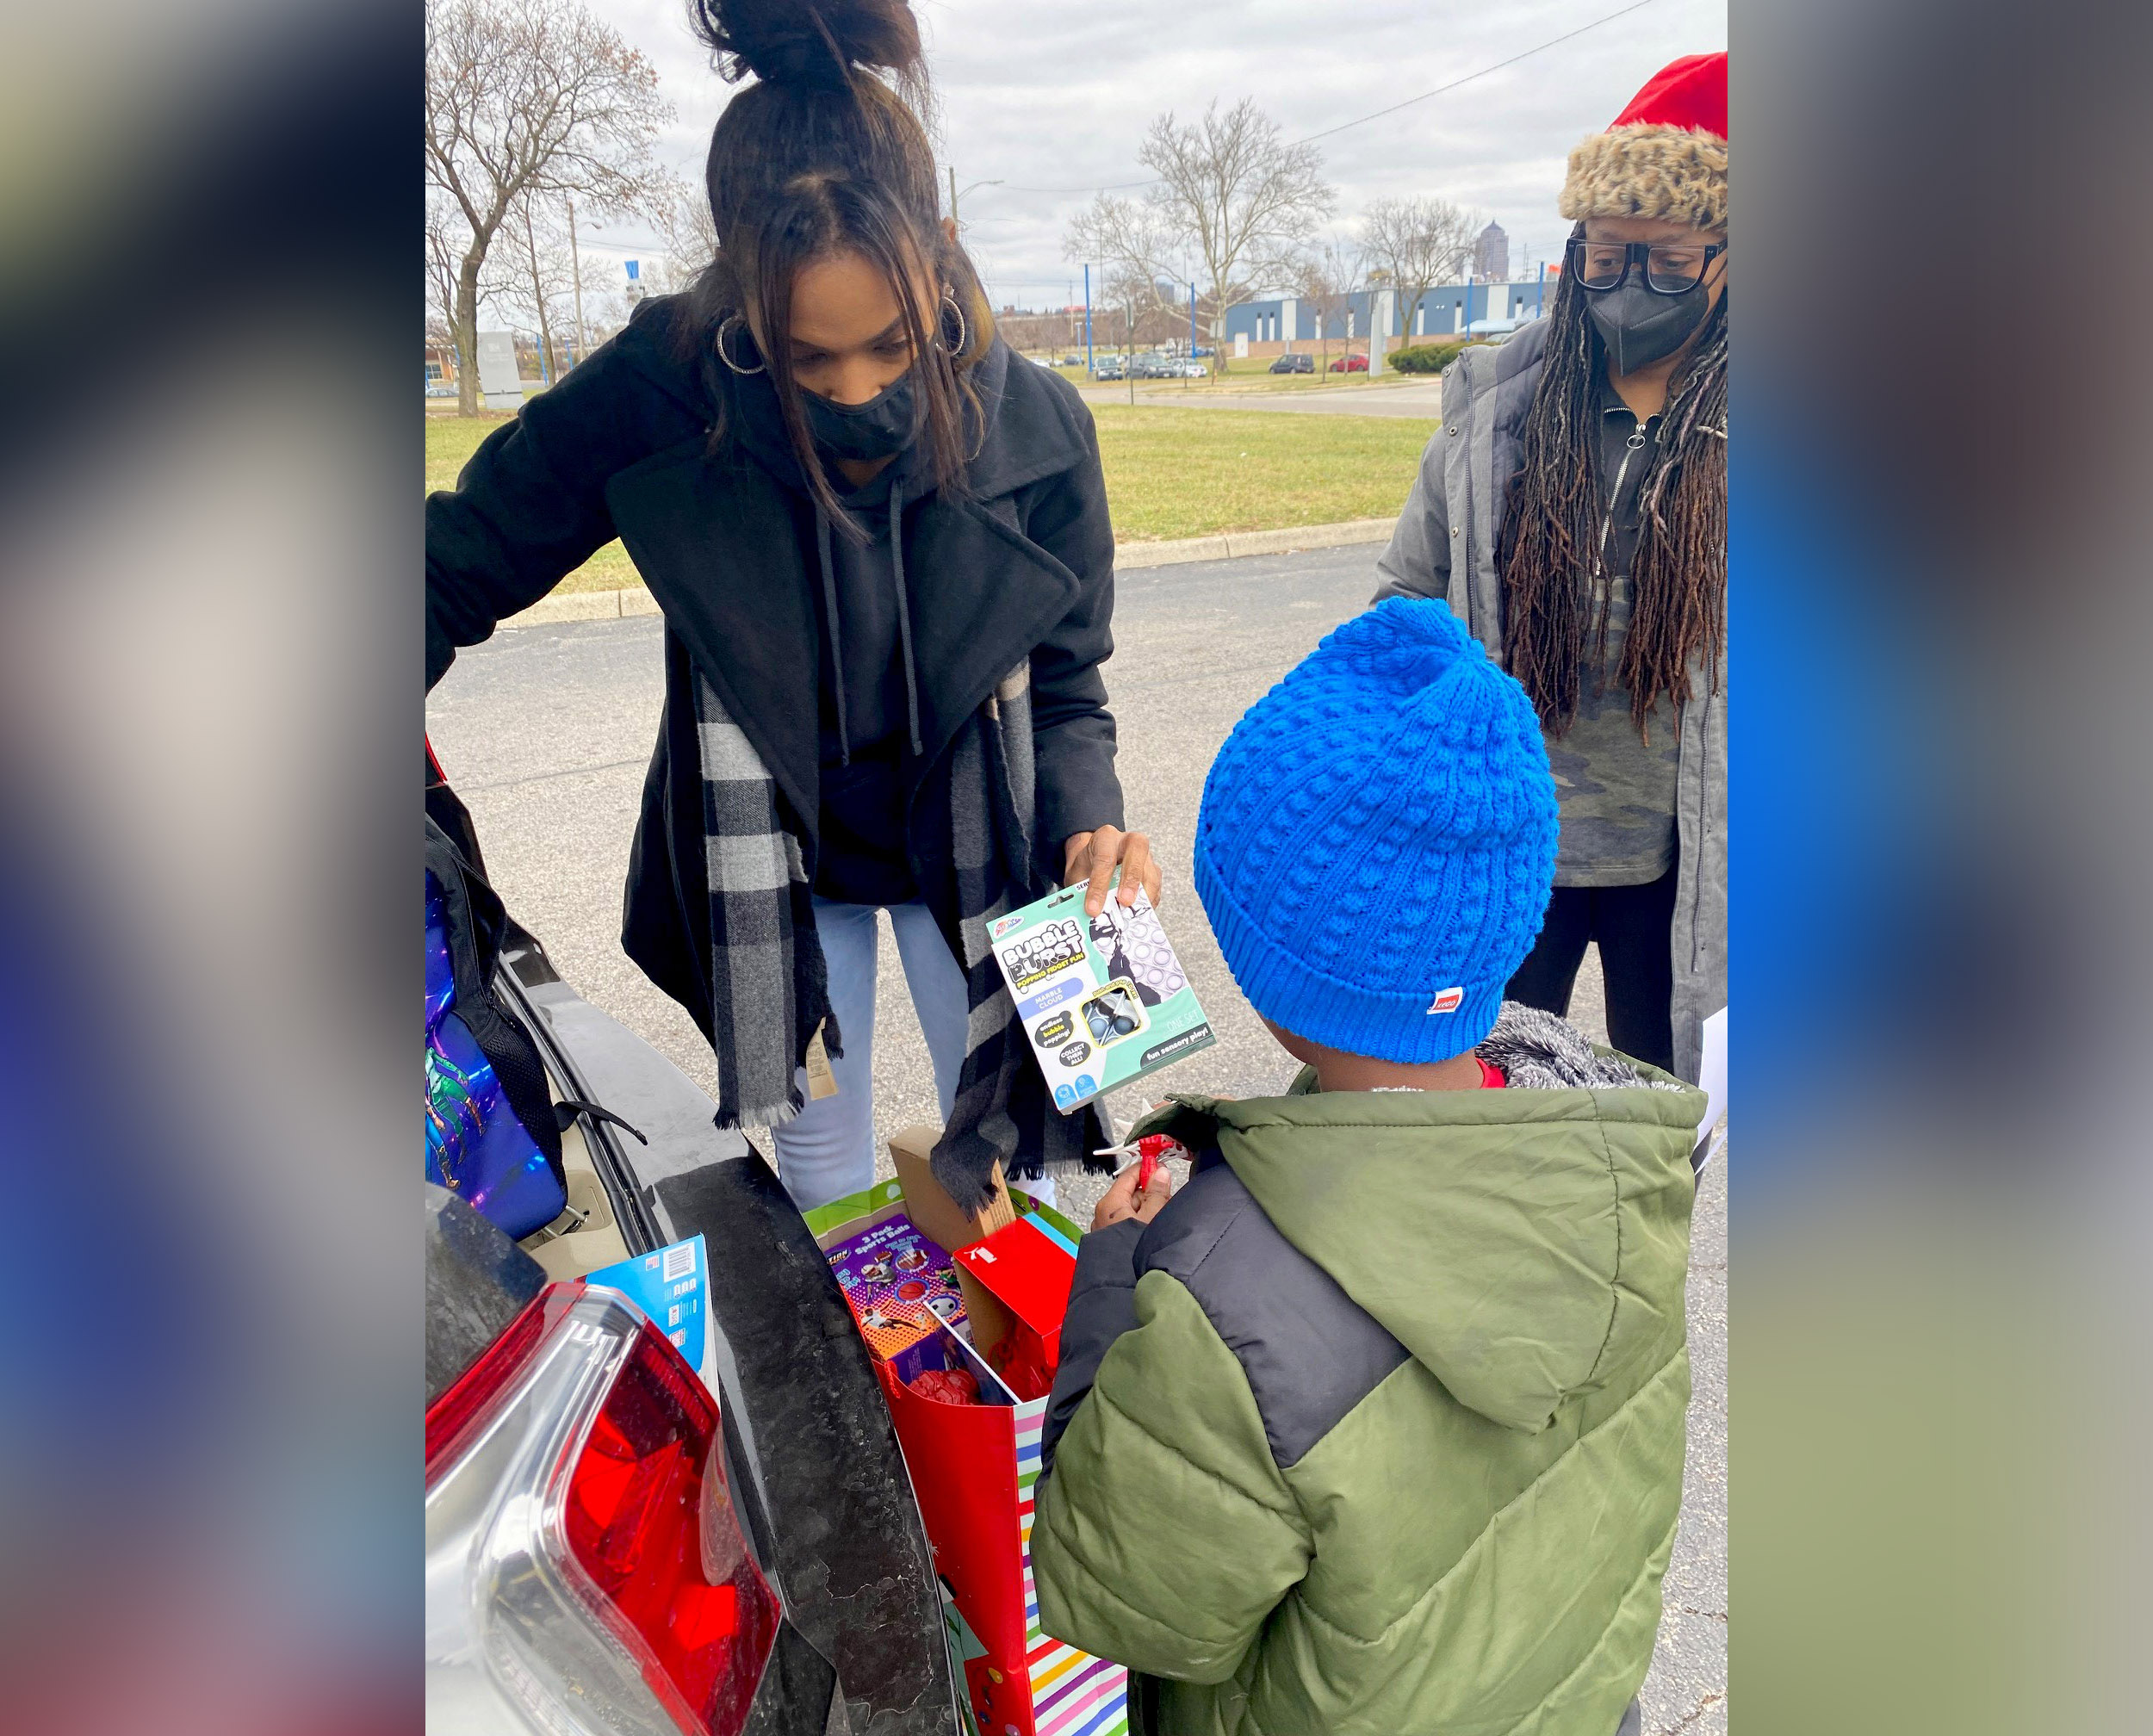 PHOTO: Janese Boston distributes a toy to a child during the "Build a Bond" toy drive she founded in Franklin County, Ohio.